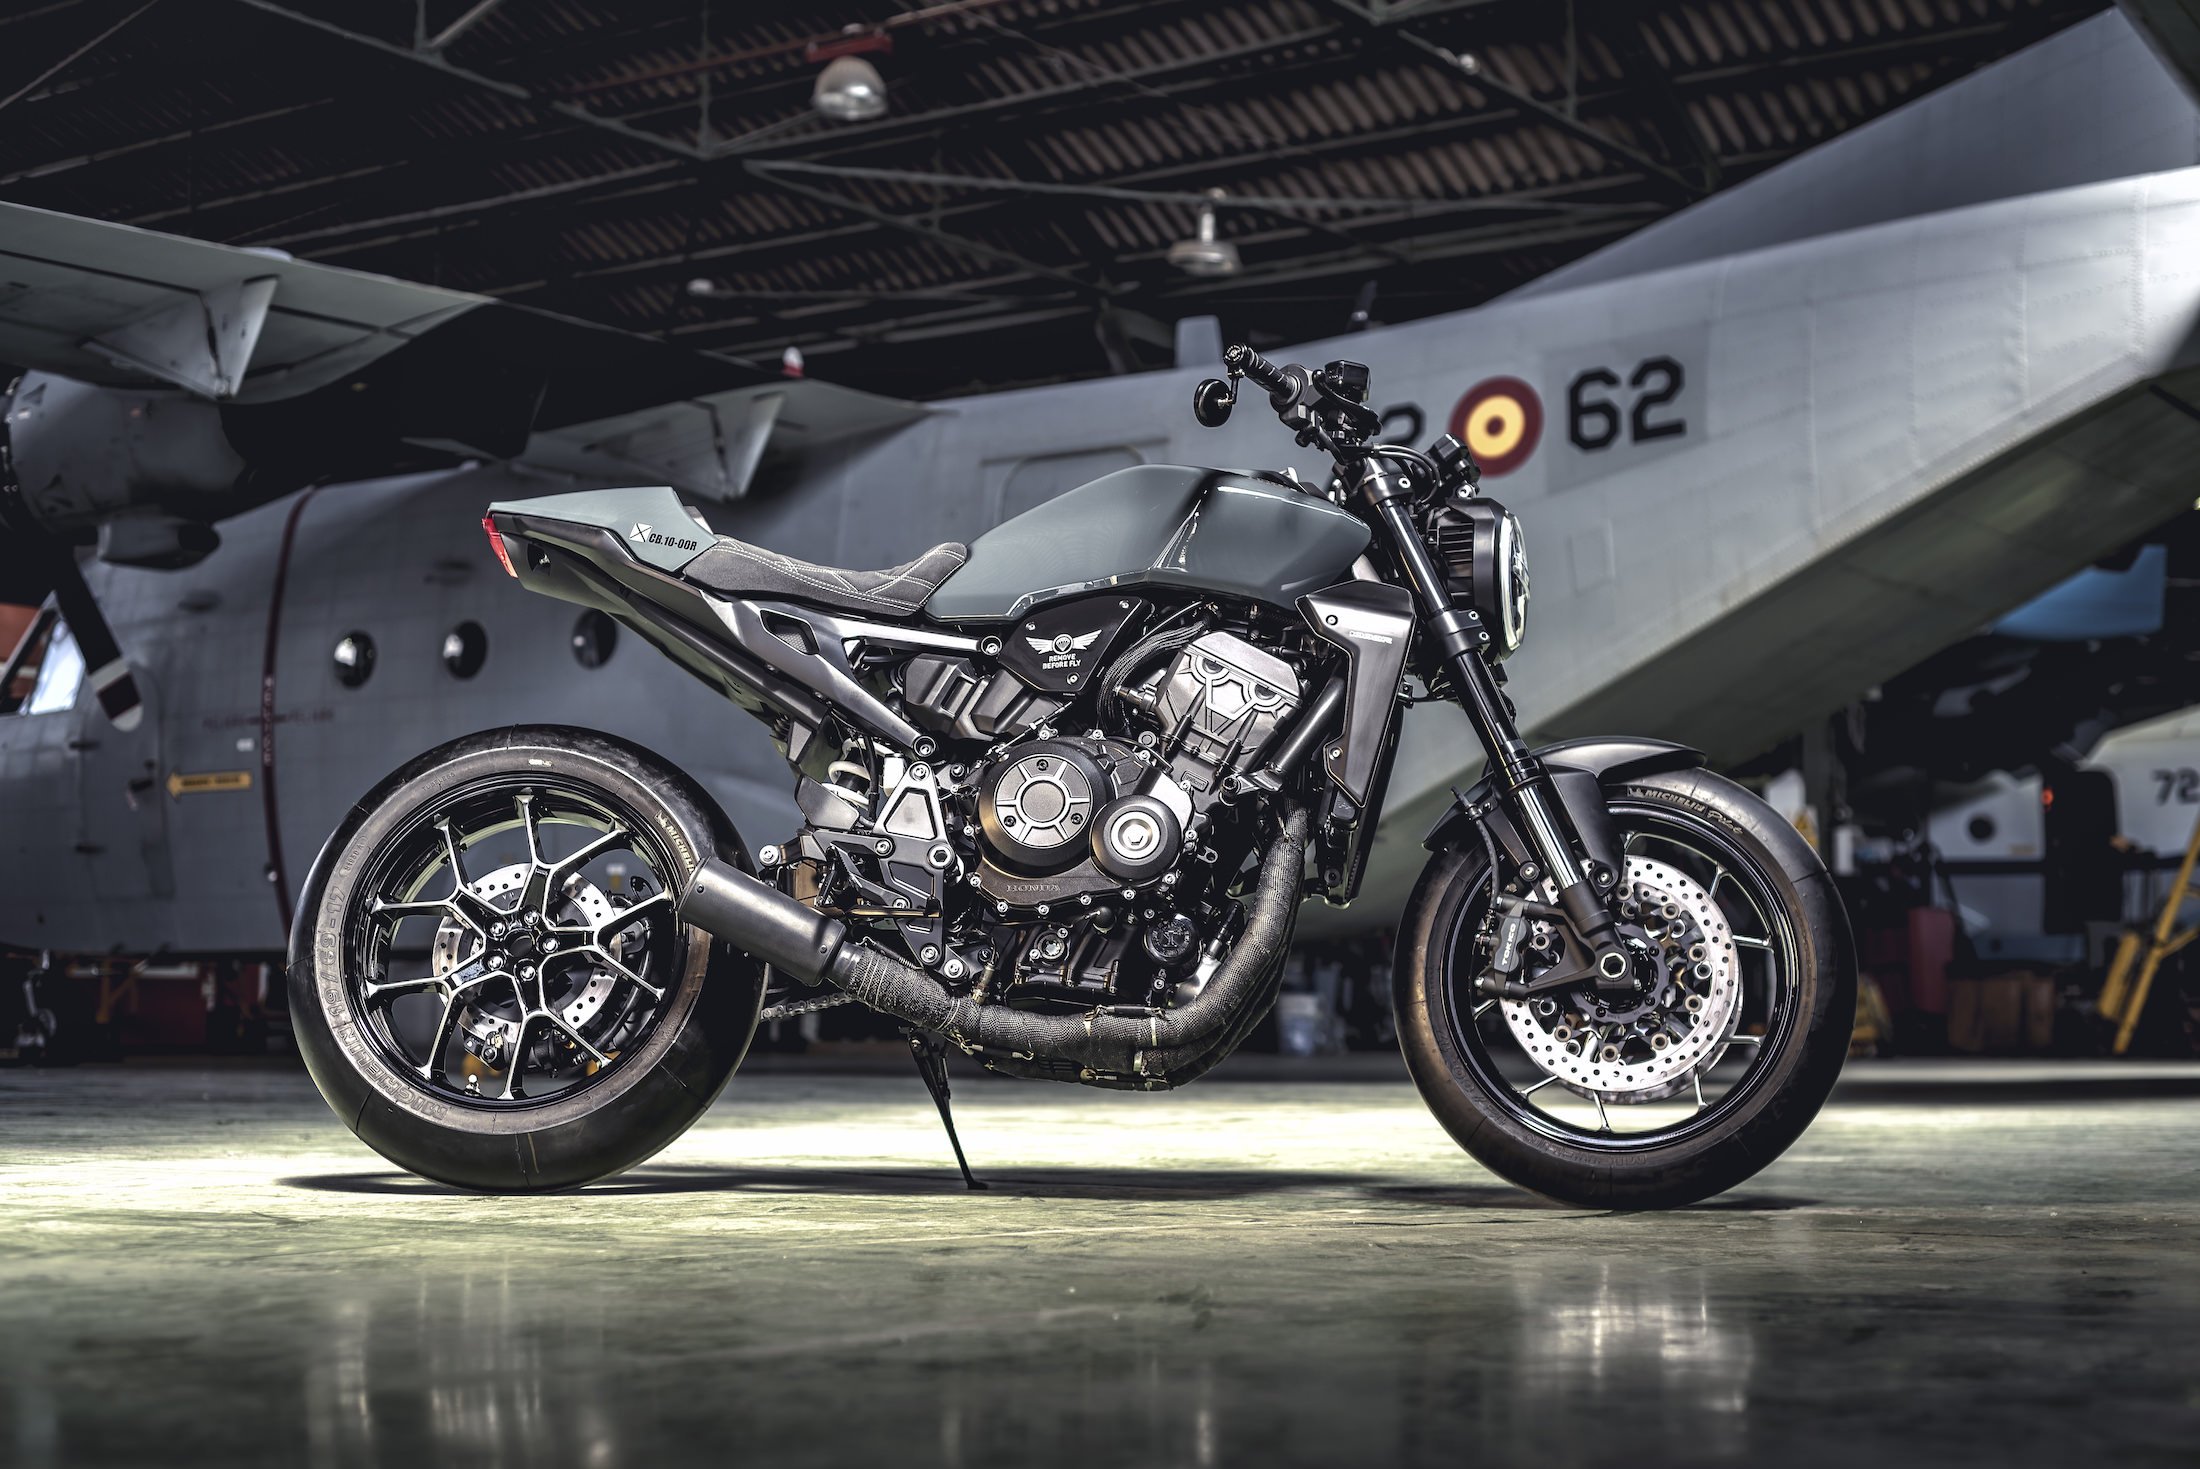 The Honda CB1000R - 13 New Customs From Spain, Portugal, and the ...